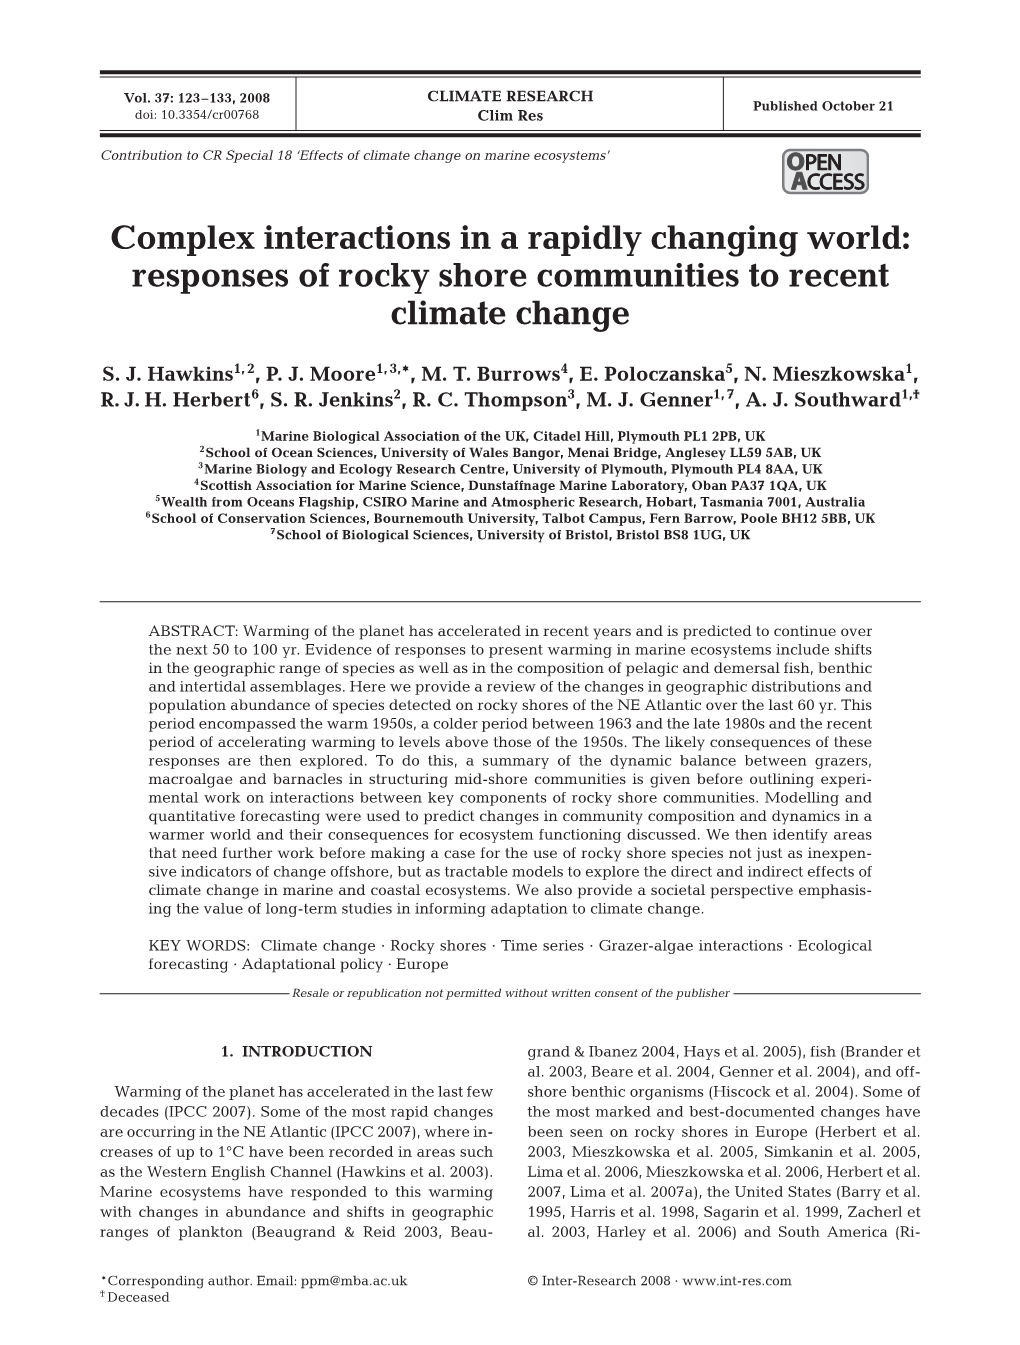 Complex Interactions in a Rapidly Changing World: Responses of Rocky Shore Communities to Recent Climate Change